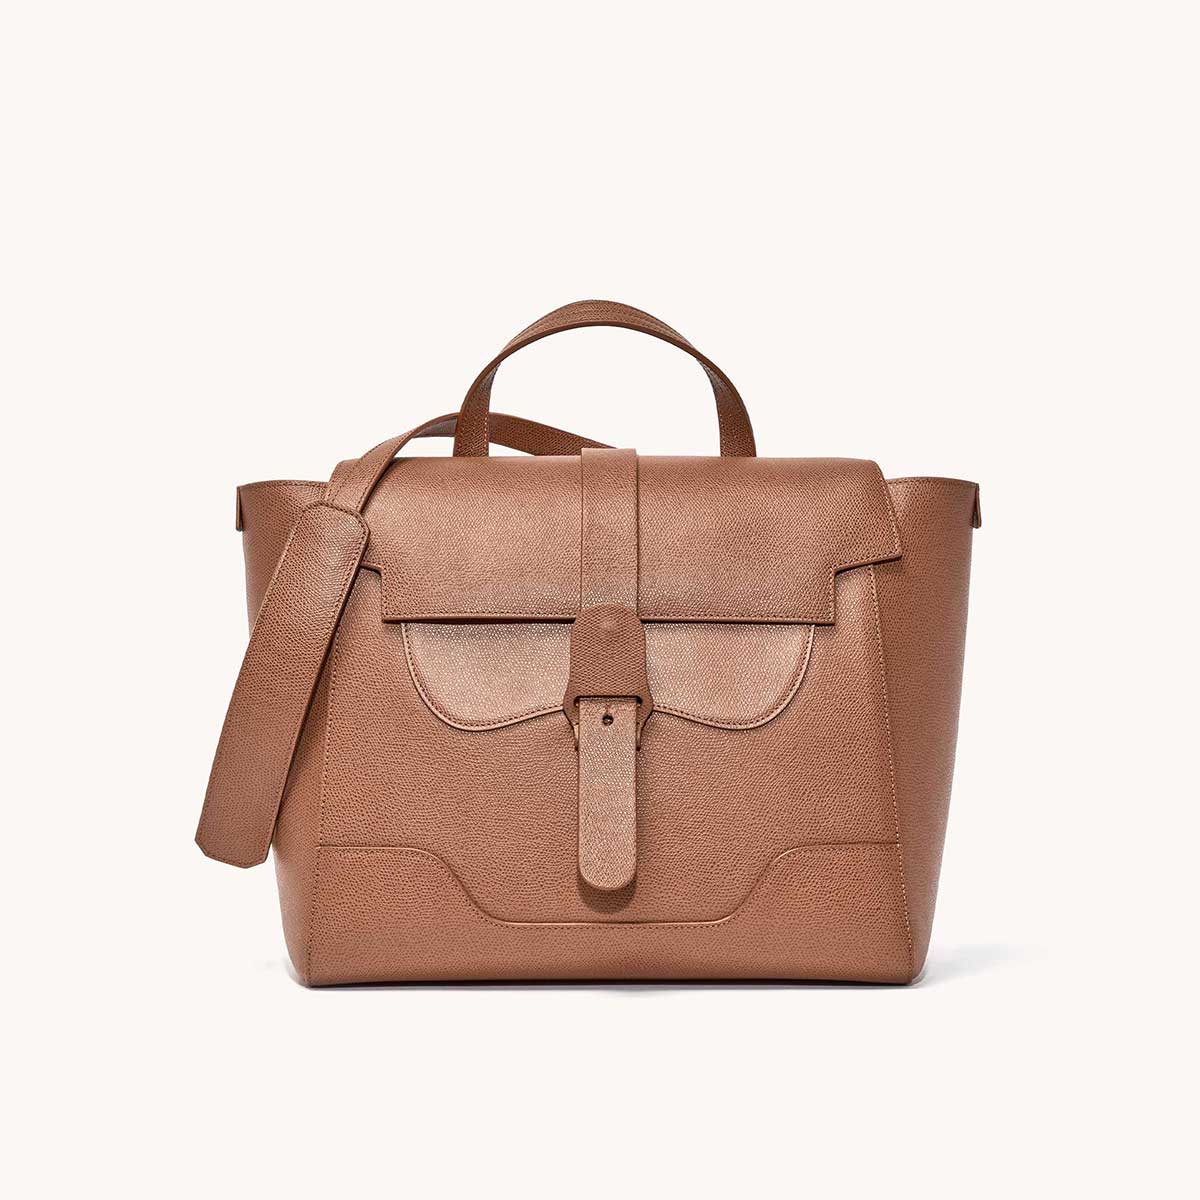 Maestra Bag Pebbled Chestnut with Gold Hardware Front View with long strap draped over top